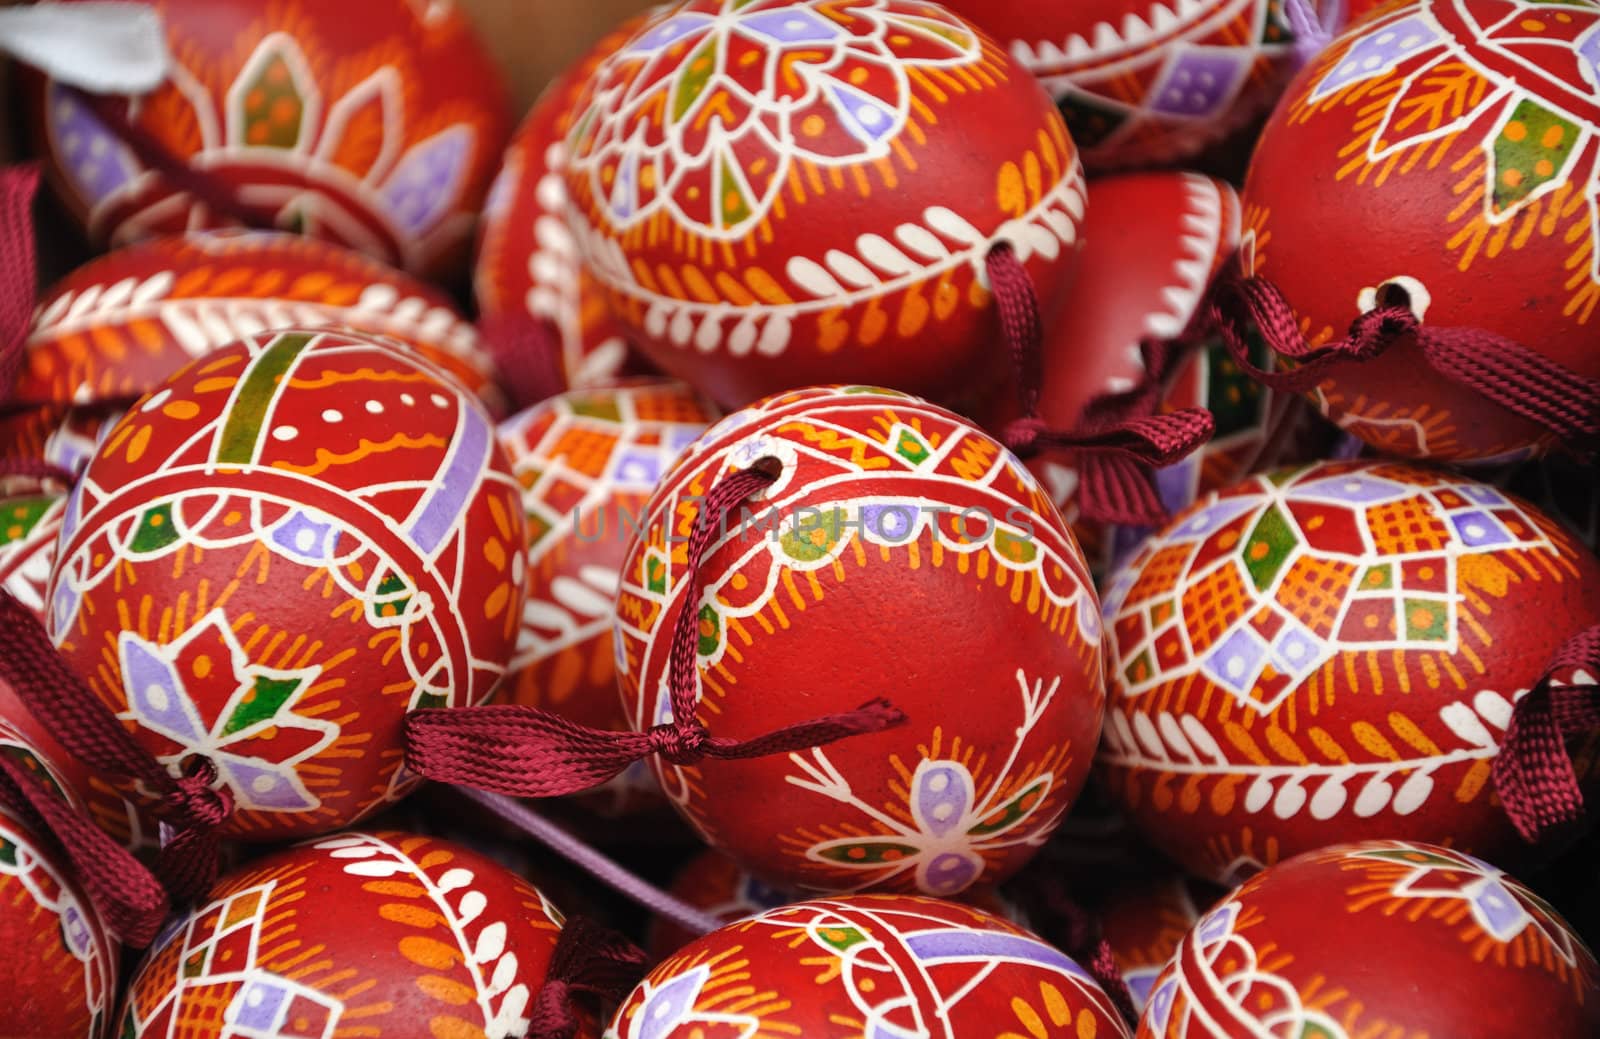 There are colored and decorated eggs from Czech republic.